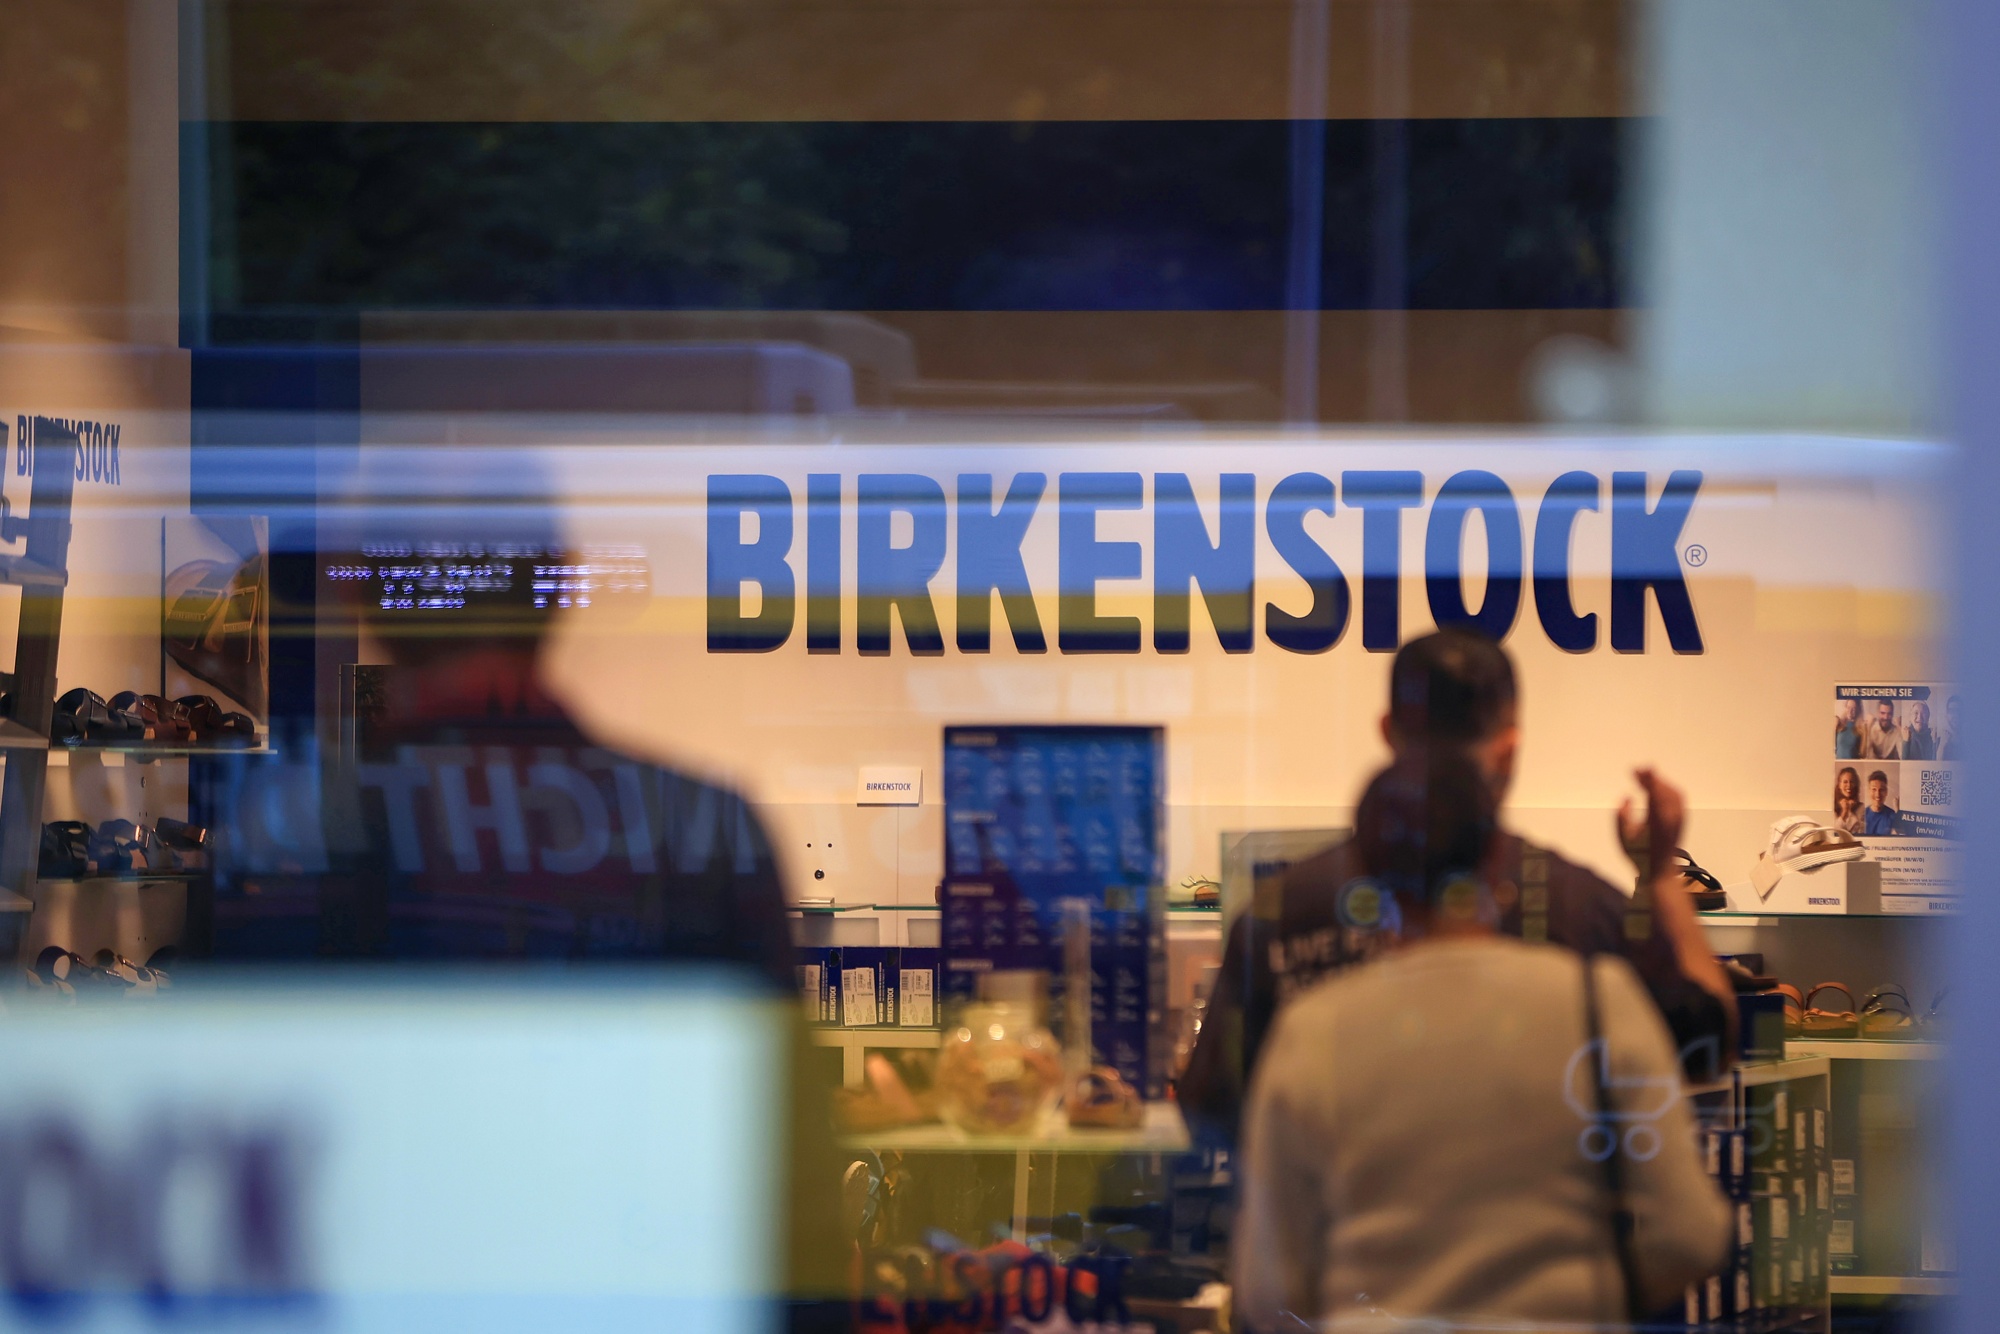 Birkenstock prices IPO at $46 a share, at low end of range